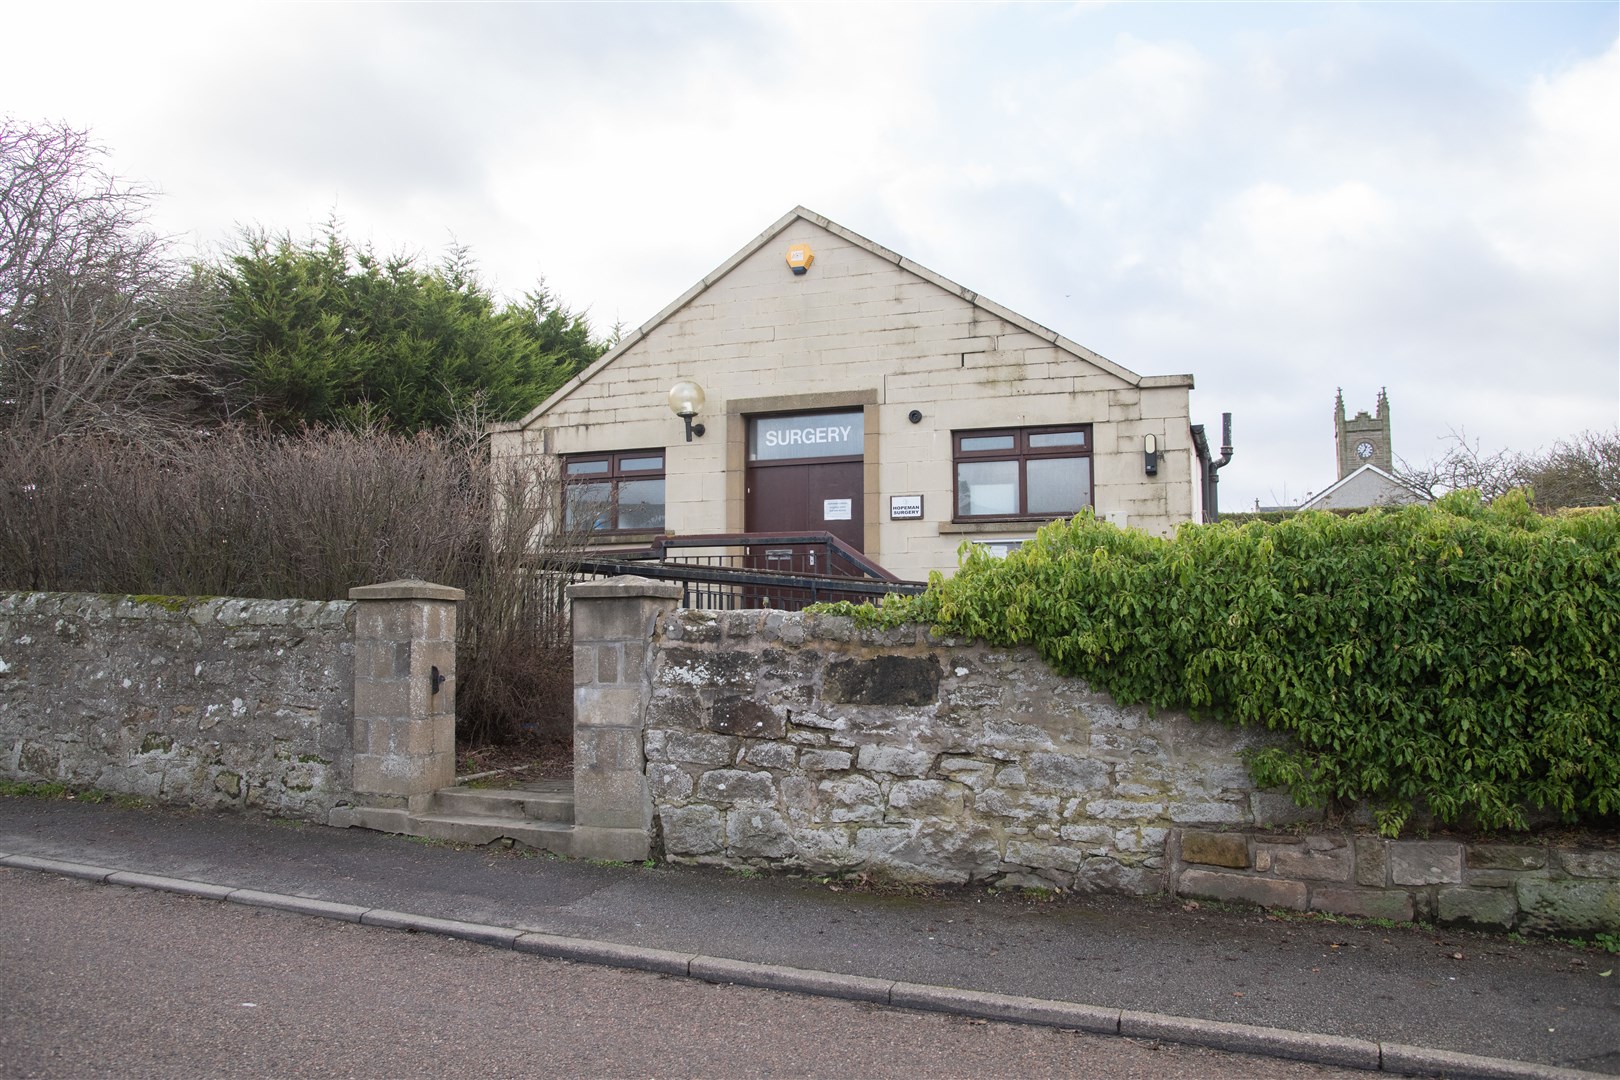 Hopeman Surgery, Harbour Street, Hopeman is one of two practices affected. Picture: Daniel Forsyth